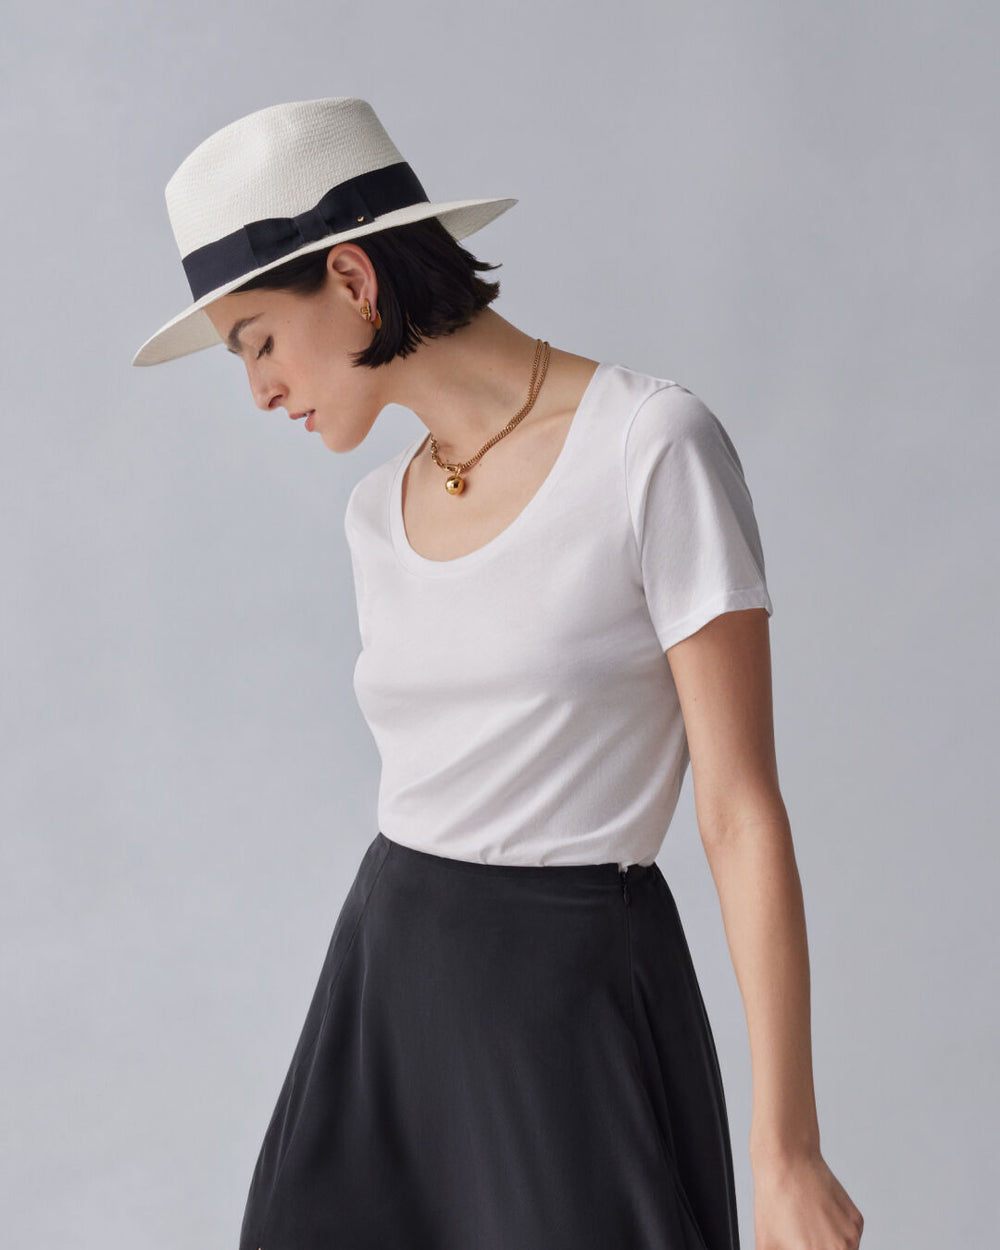 Woman wearing a hat, T-shirt, and skirt, facing sideways.